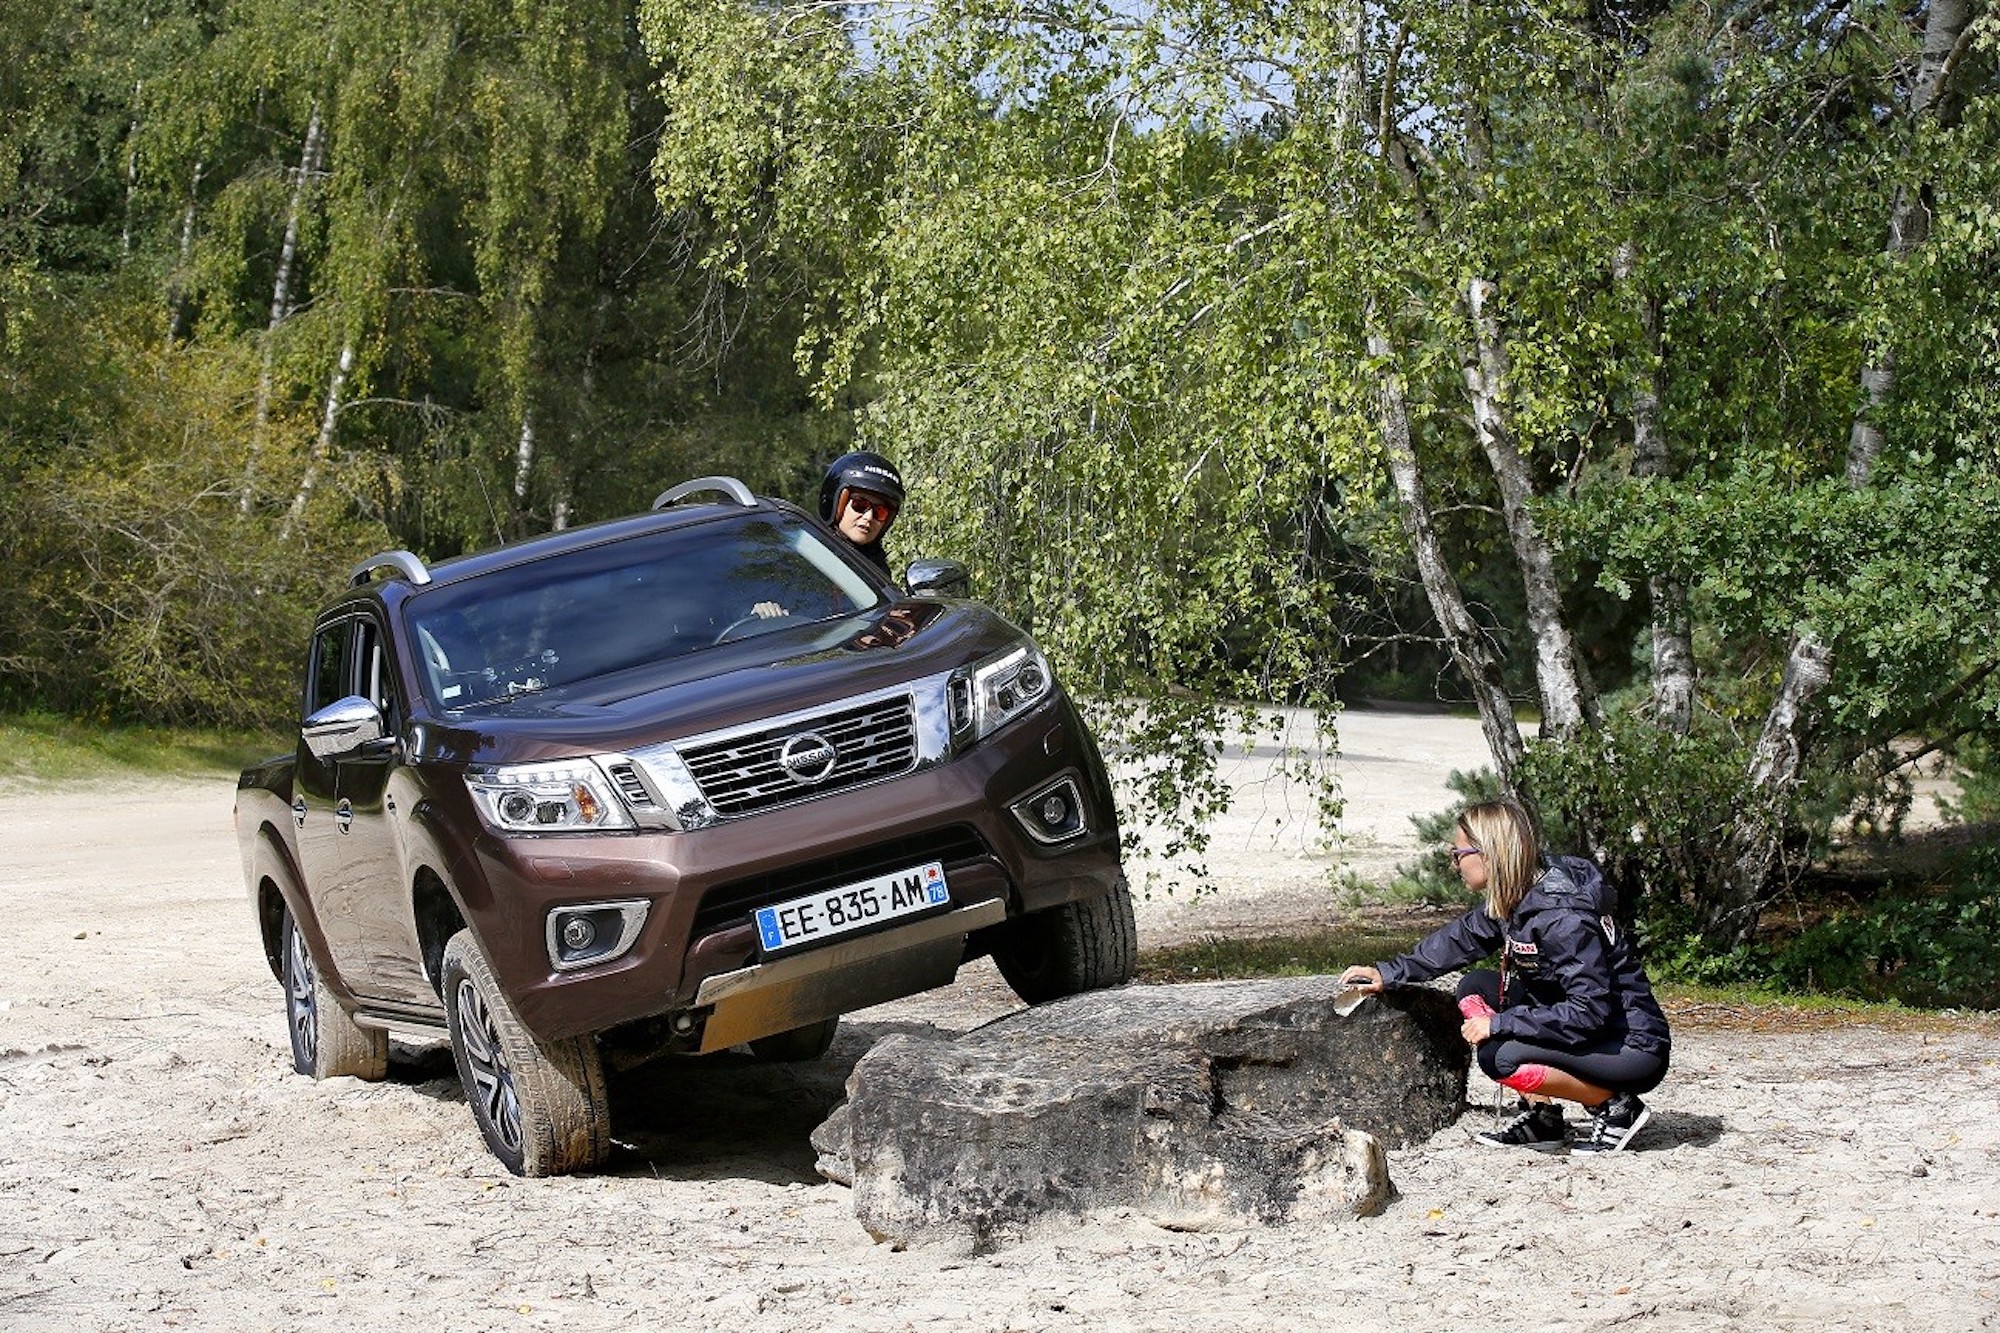 A burgundy colored Nissan Navara-R driving over a rock.